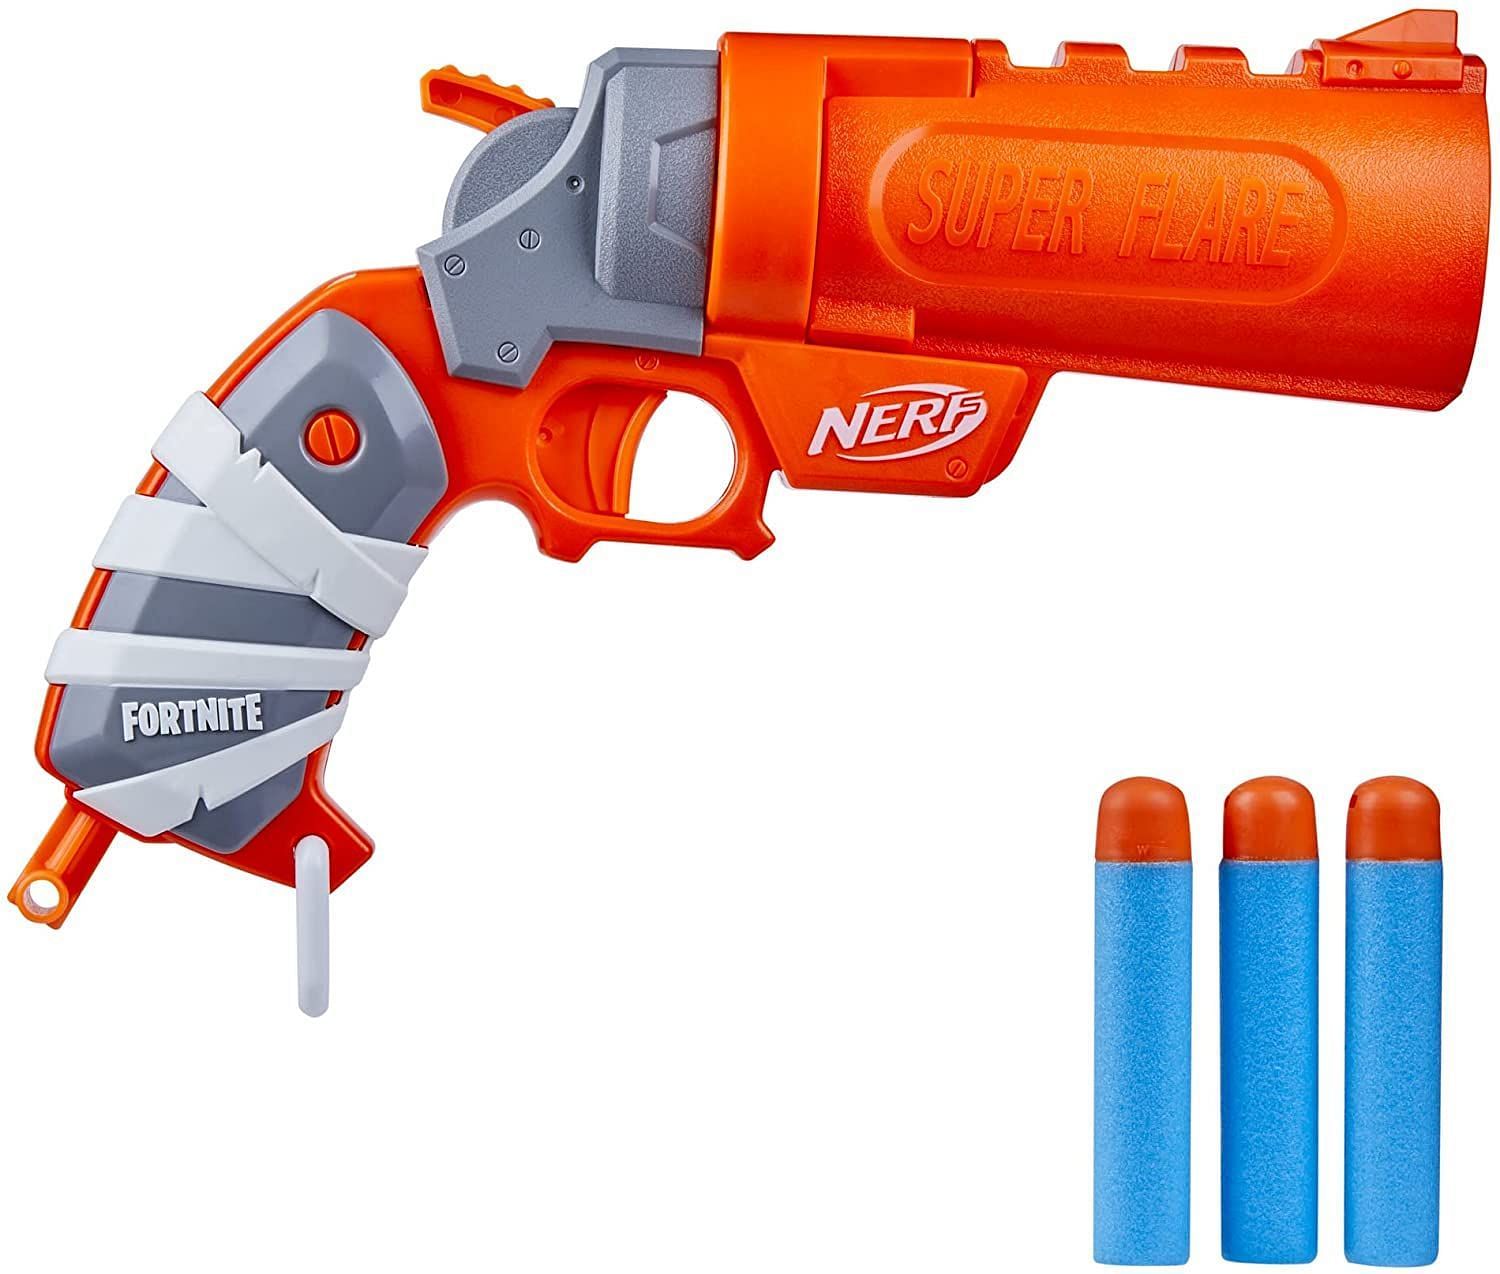 10 Nerf guns to buy when you're on a budget